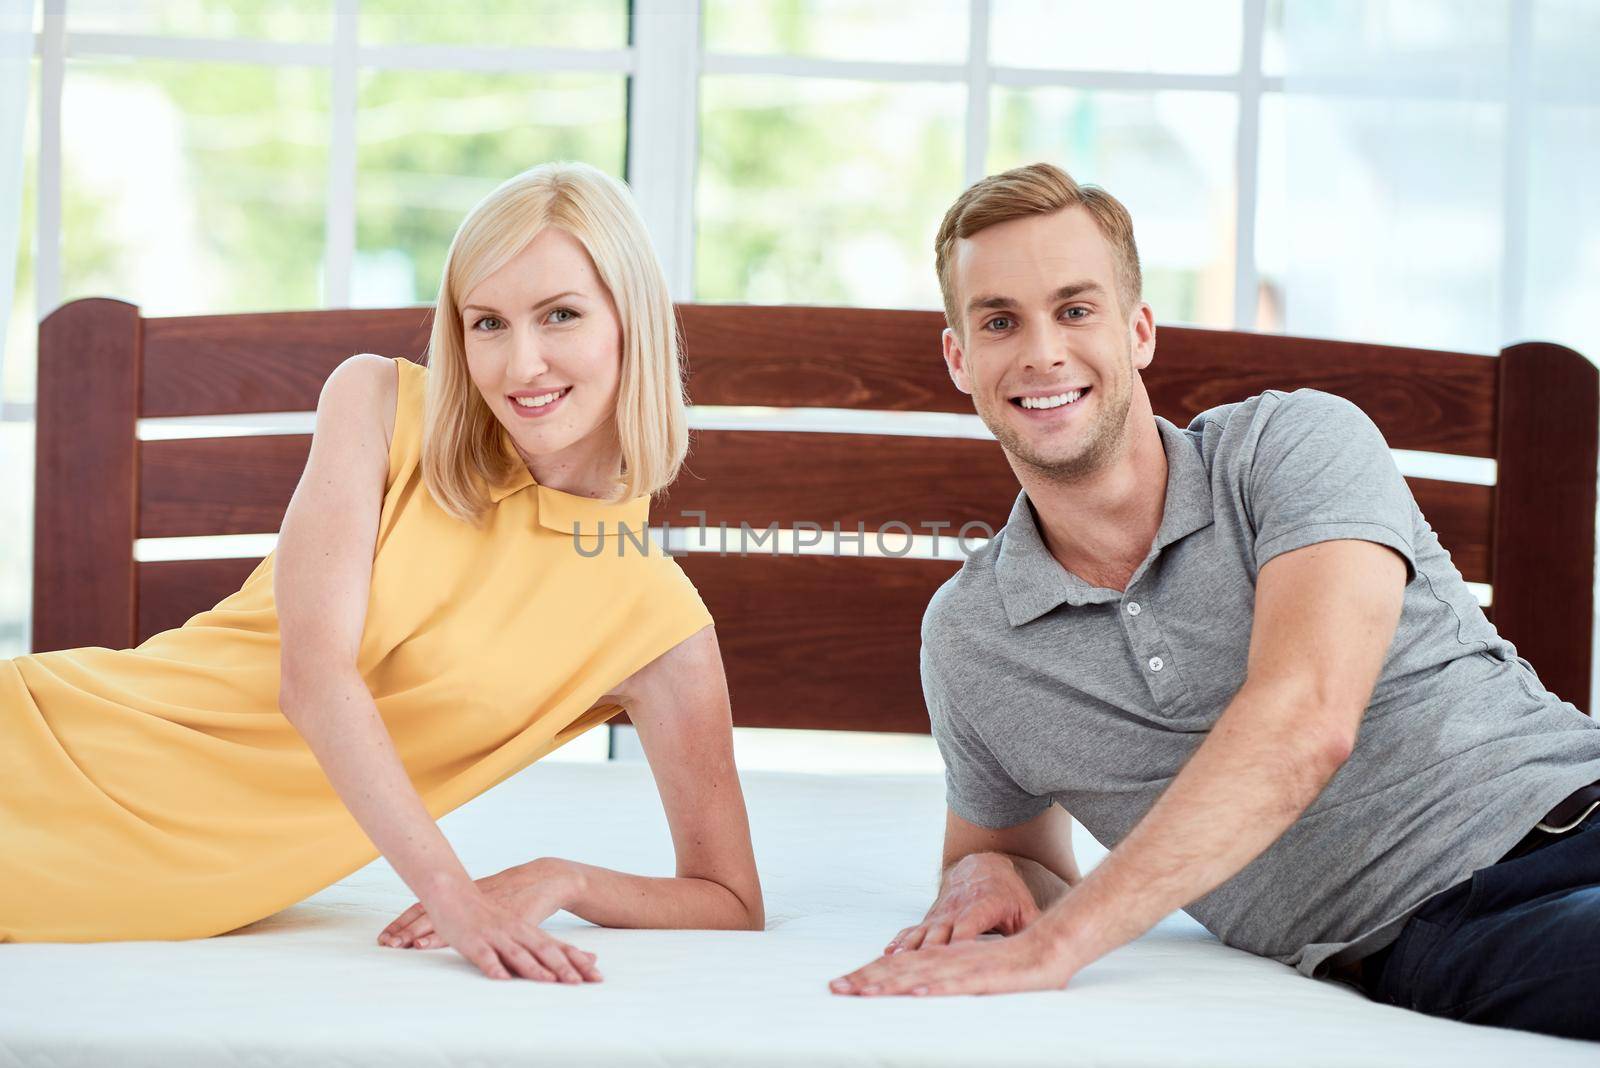 Portrait of beautiful and happy young couple testing a new ergonomic mattress for their bed and smiling at camera. Healthcare. Family concept. Hope. Bedroom